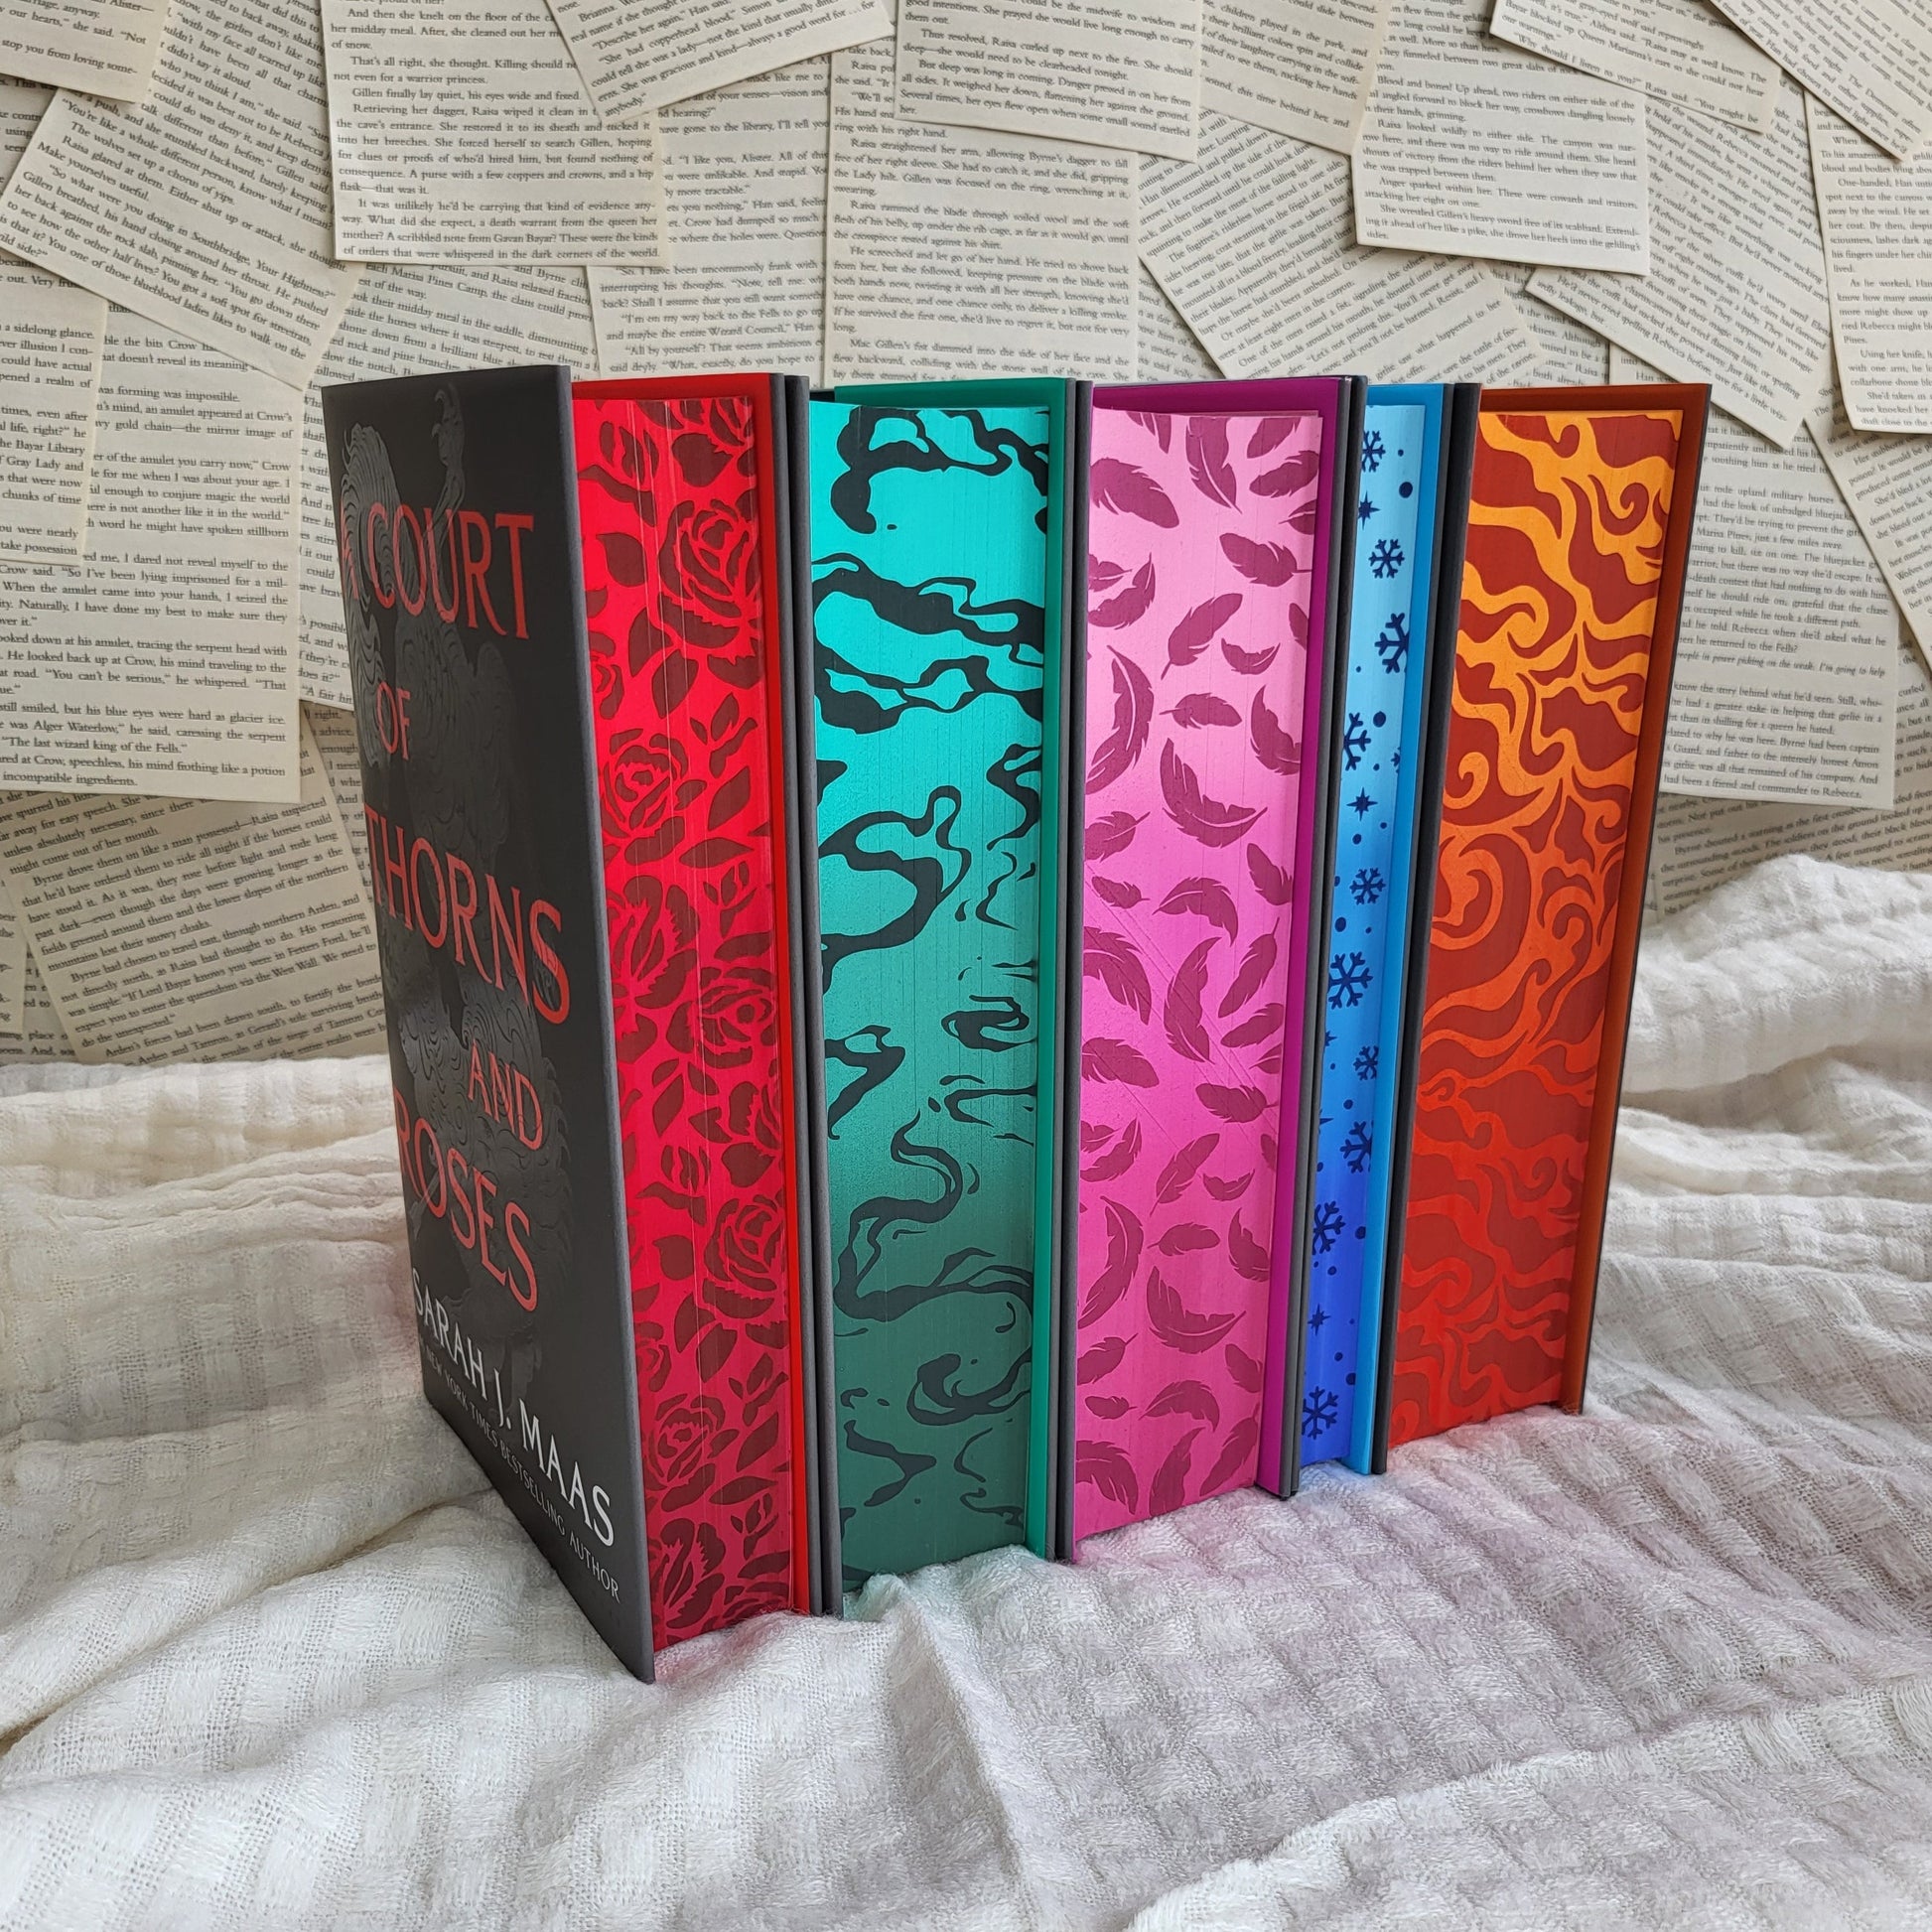 ACOTAR Set (A Court of Thorns and Roses)